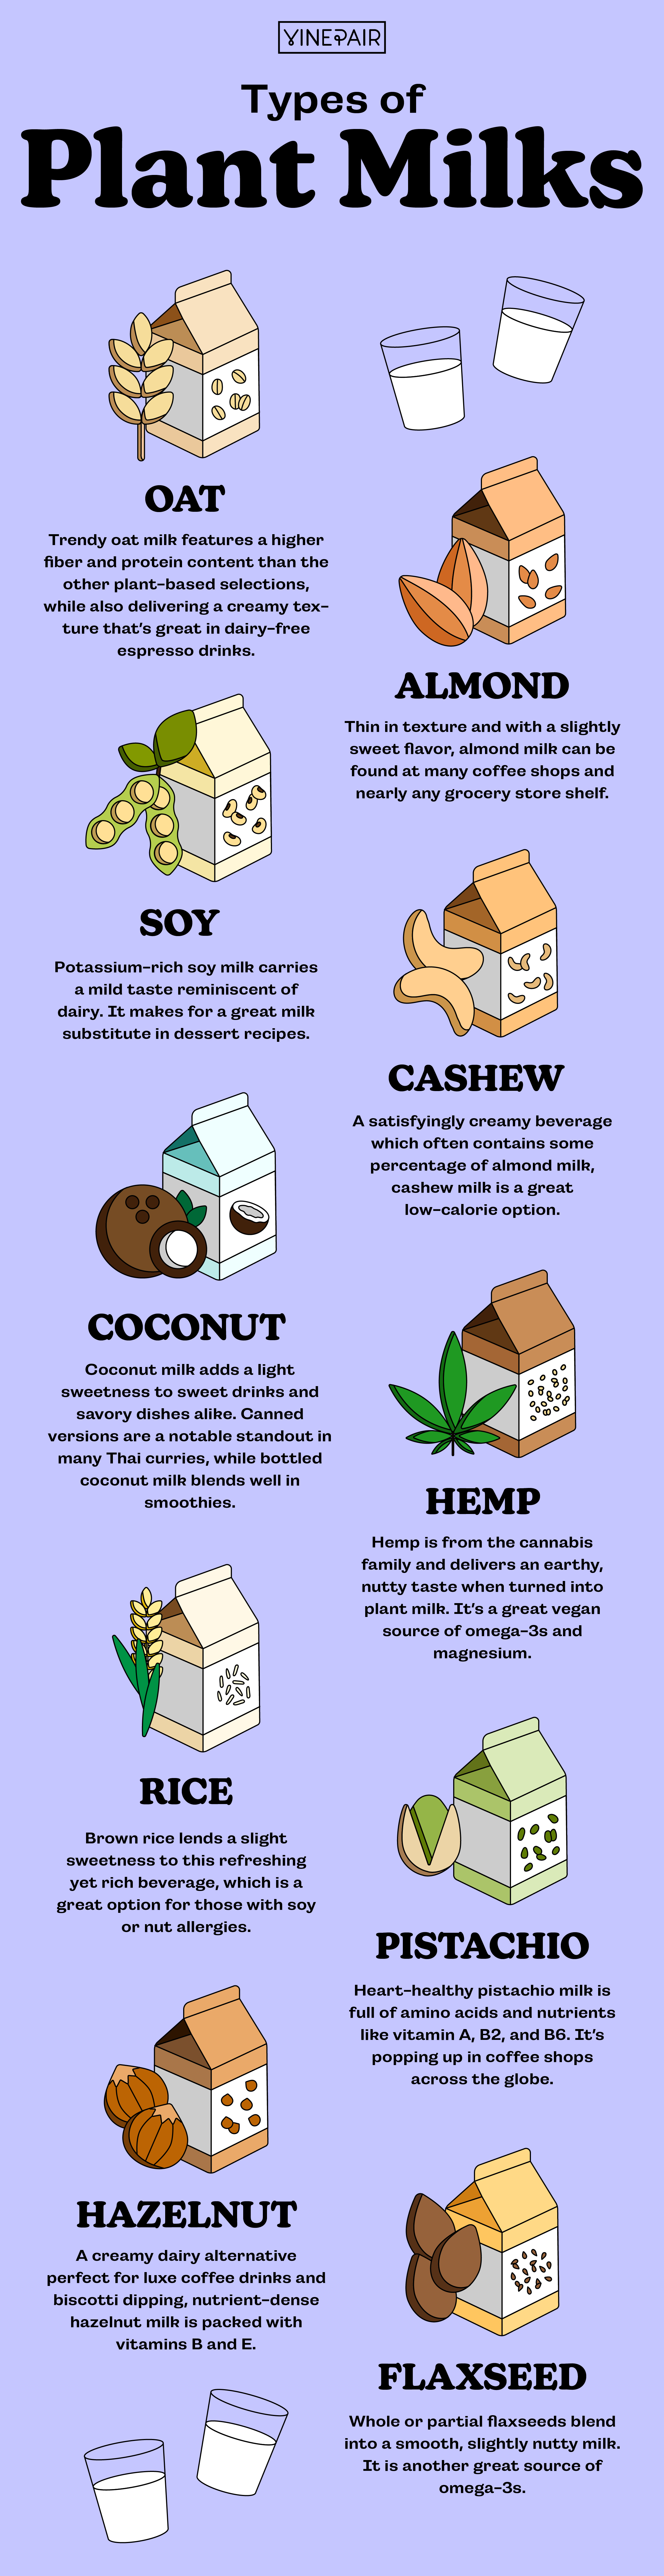 The Differences Between Each Type of Plant Milk [Infographic]